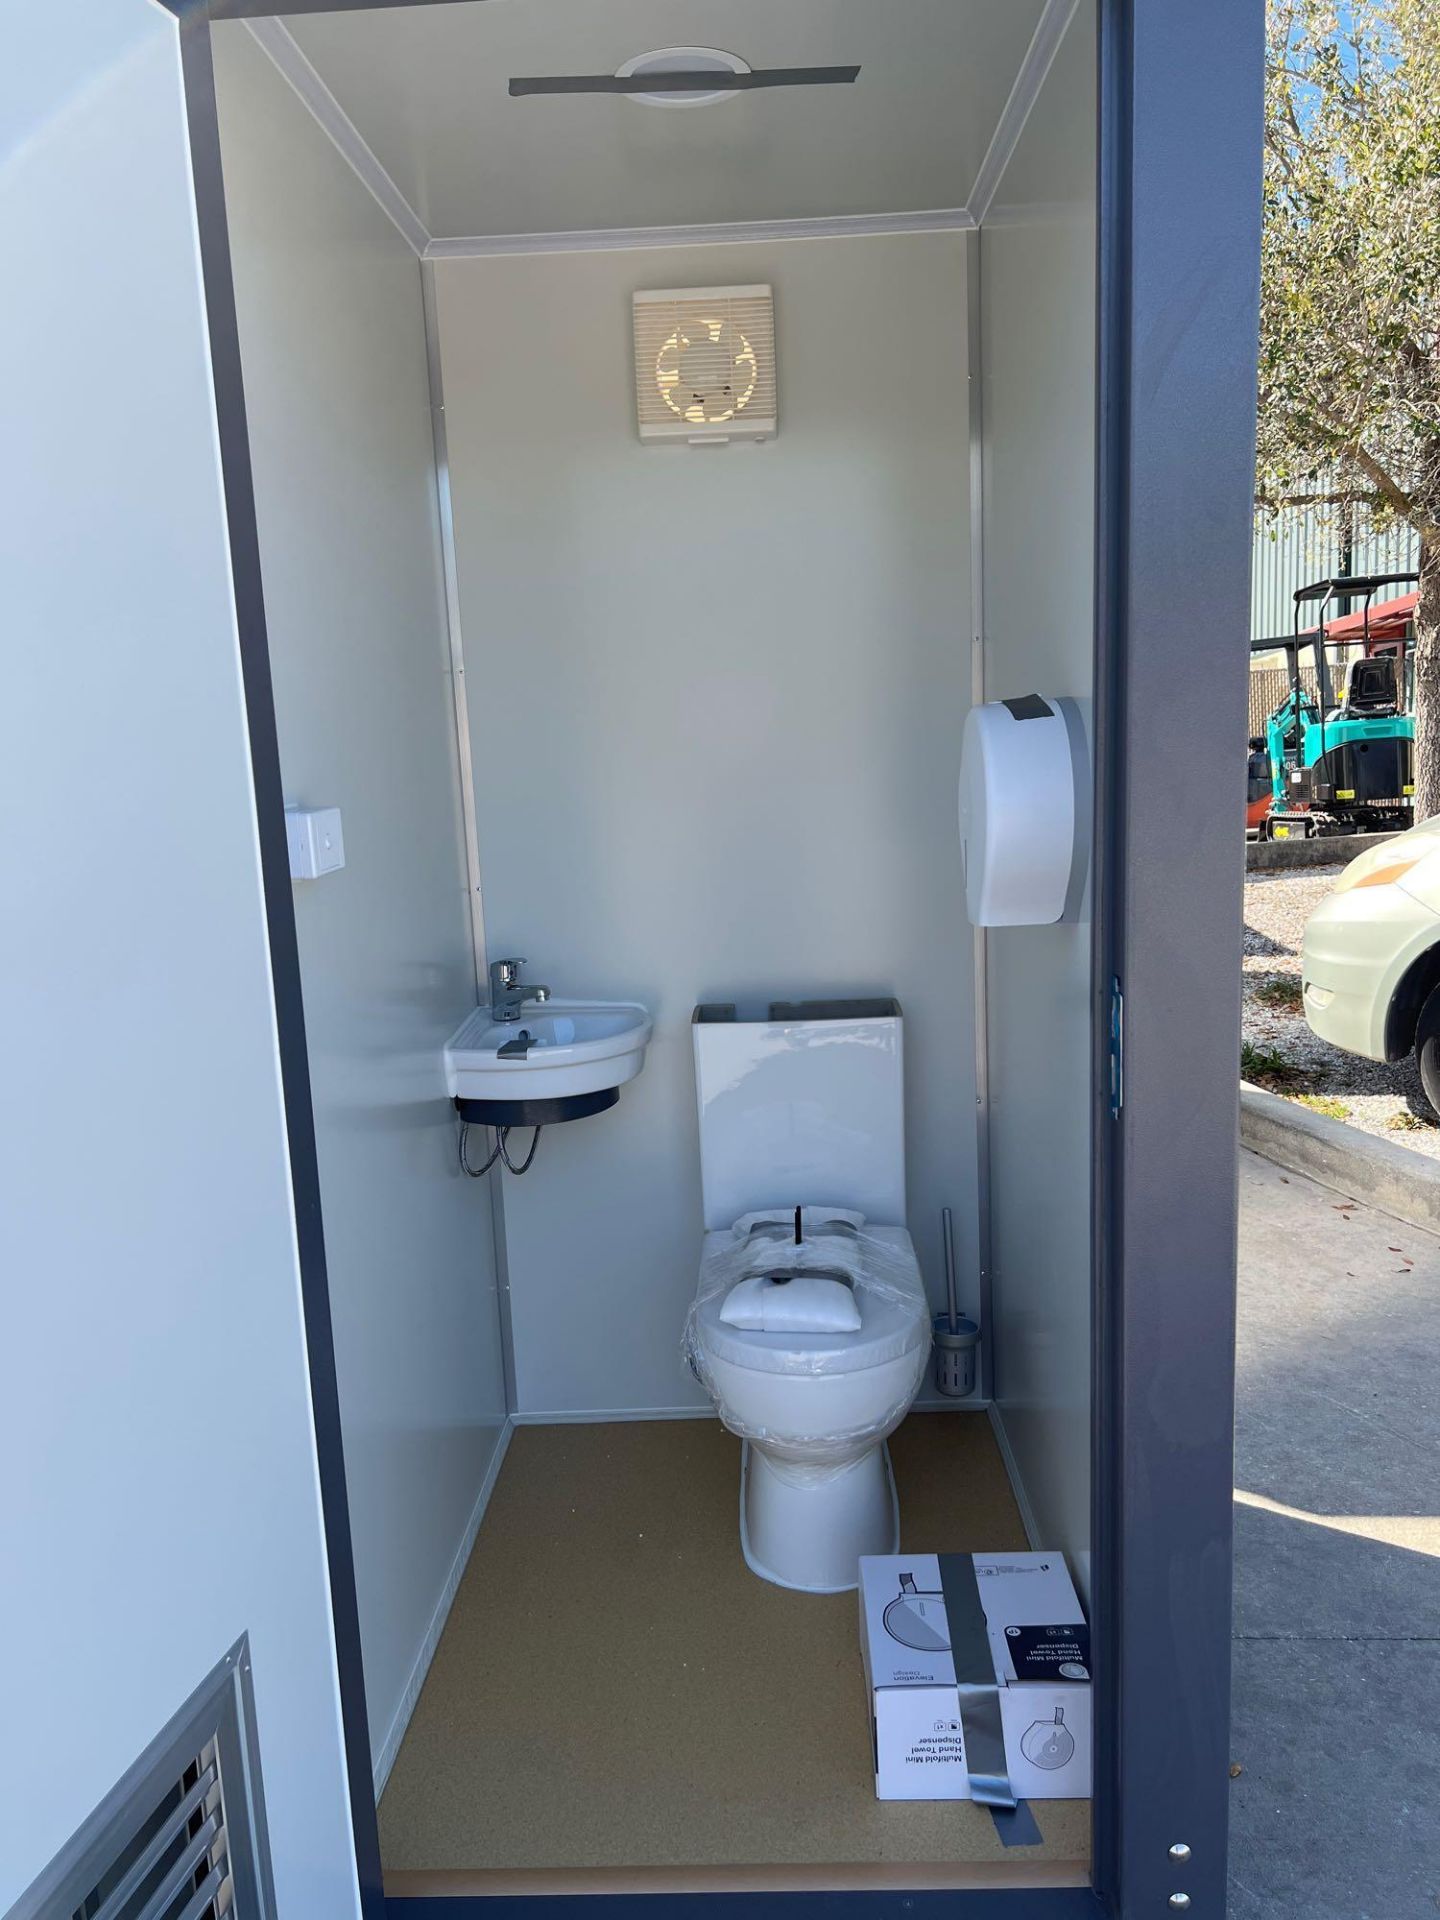 UNUSED PORTABLE DOUBLE BATHROOM UNIT, 2 STALLS, ELECTRIC & PLUMBING HOOK UP WITH EXTERIOR PLUMBING C - Image 10 of 13